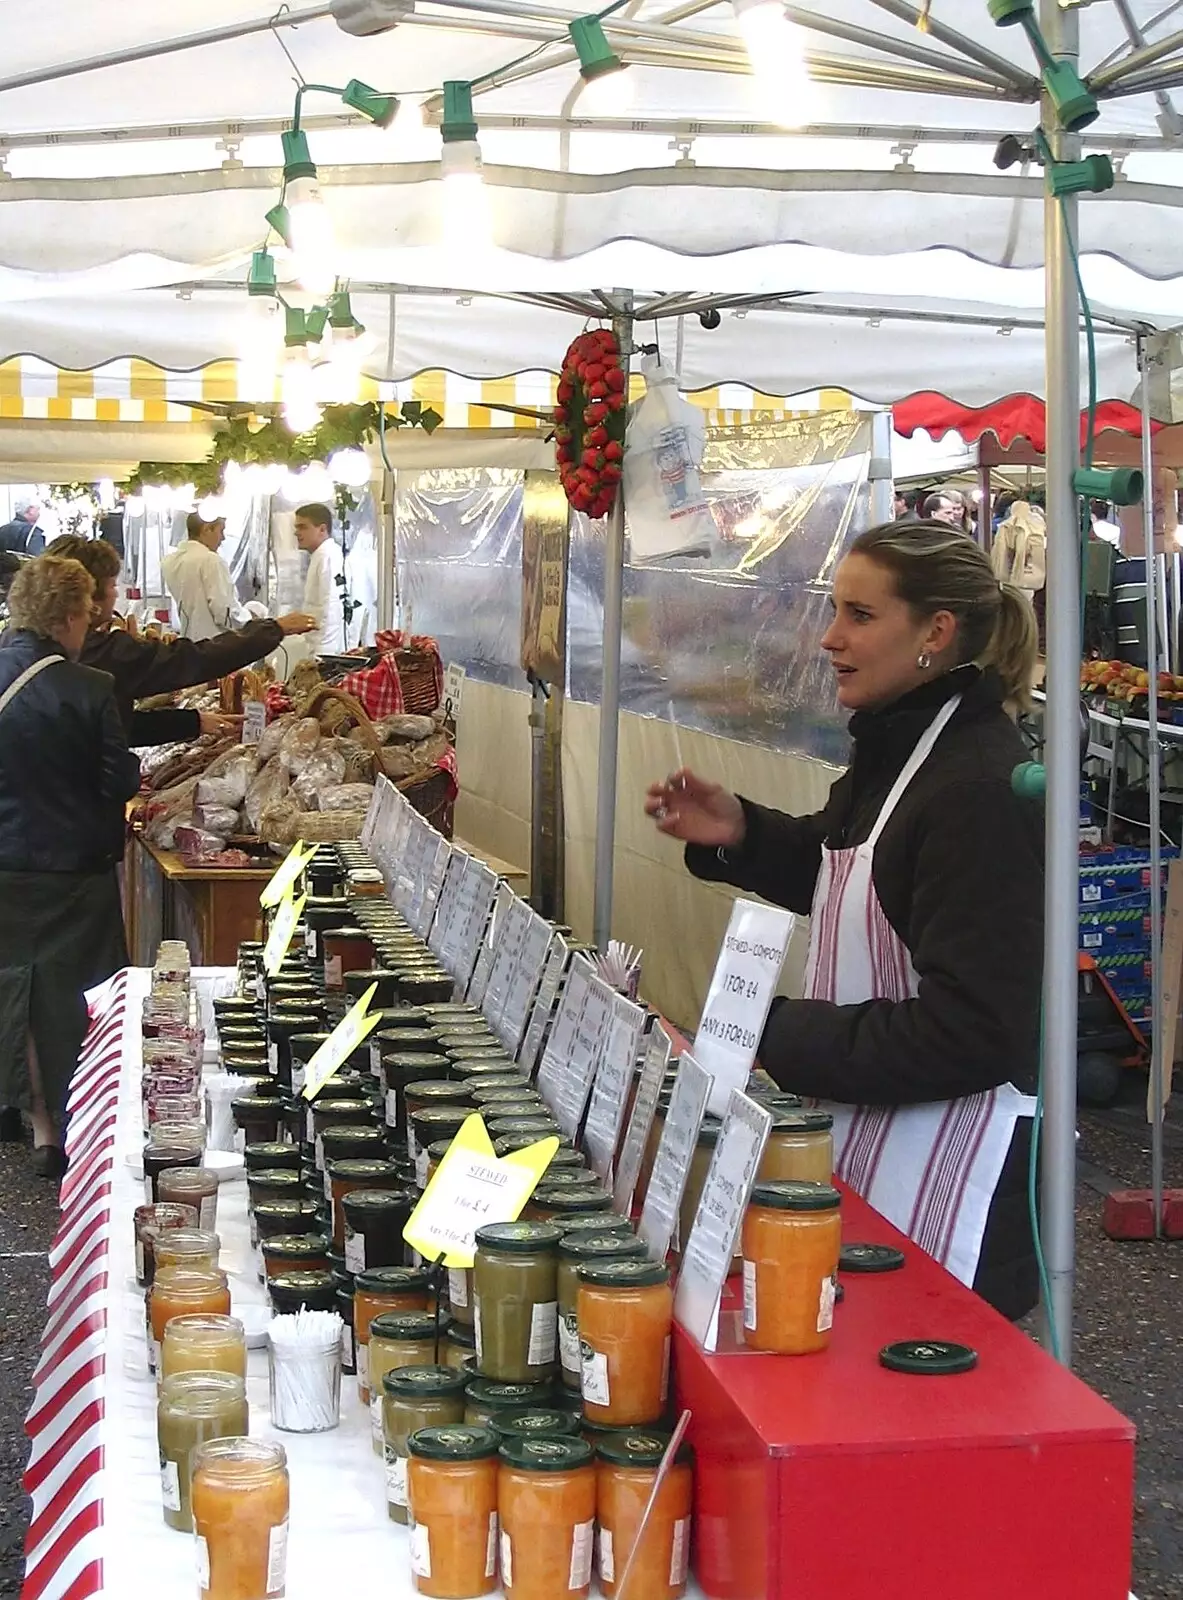 A woman sells preserves, from A French Market, Blues and Curry, Diss, Scole and Brome - 17th October 2004